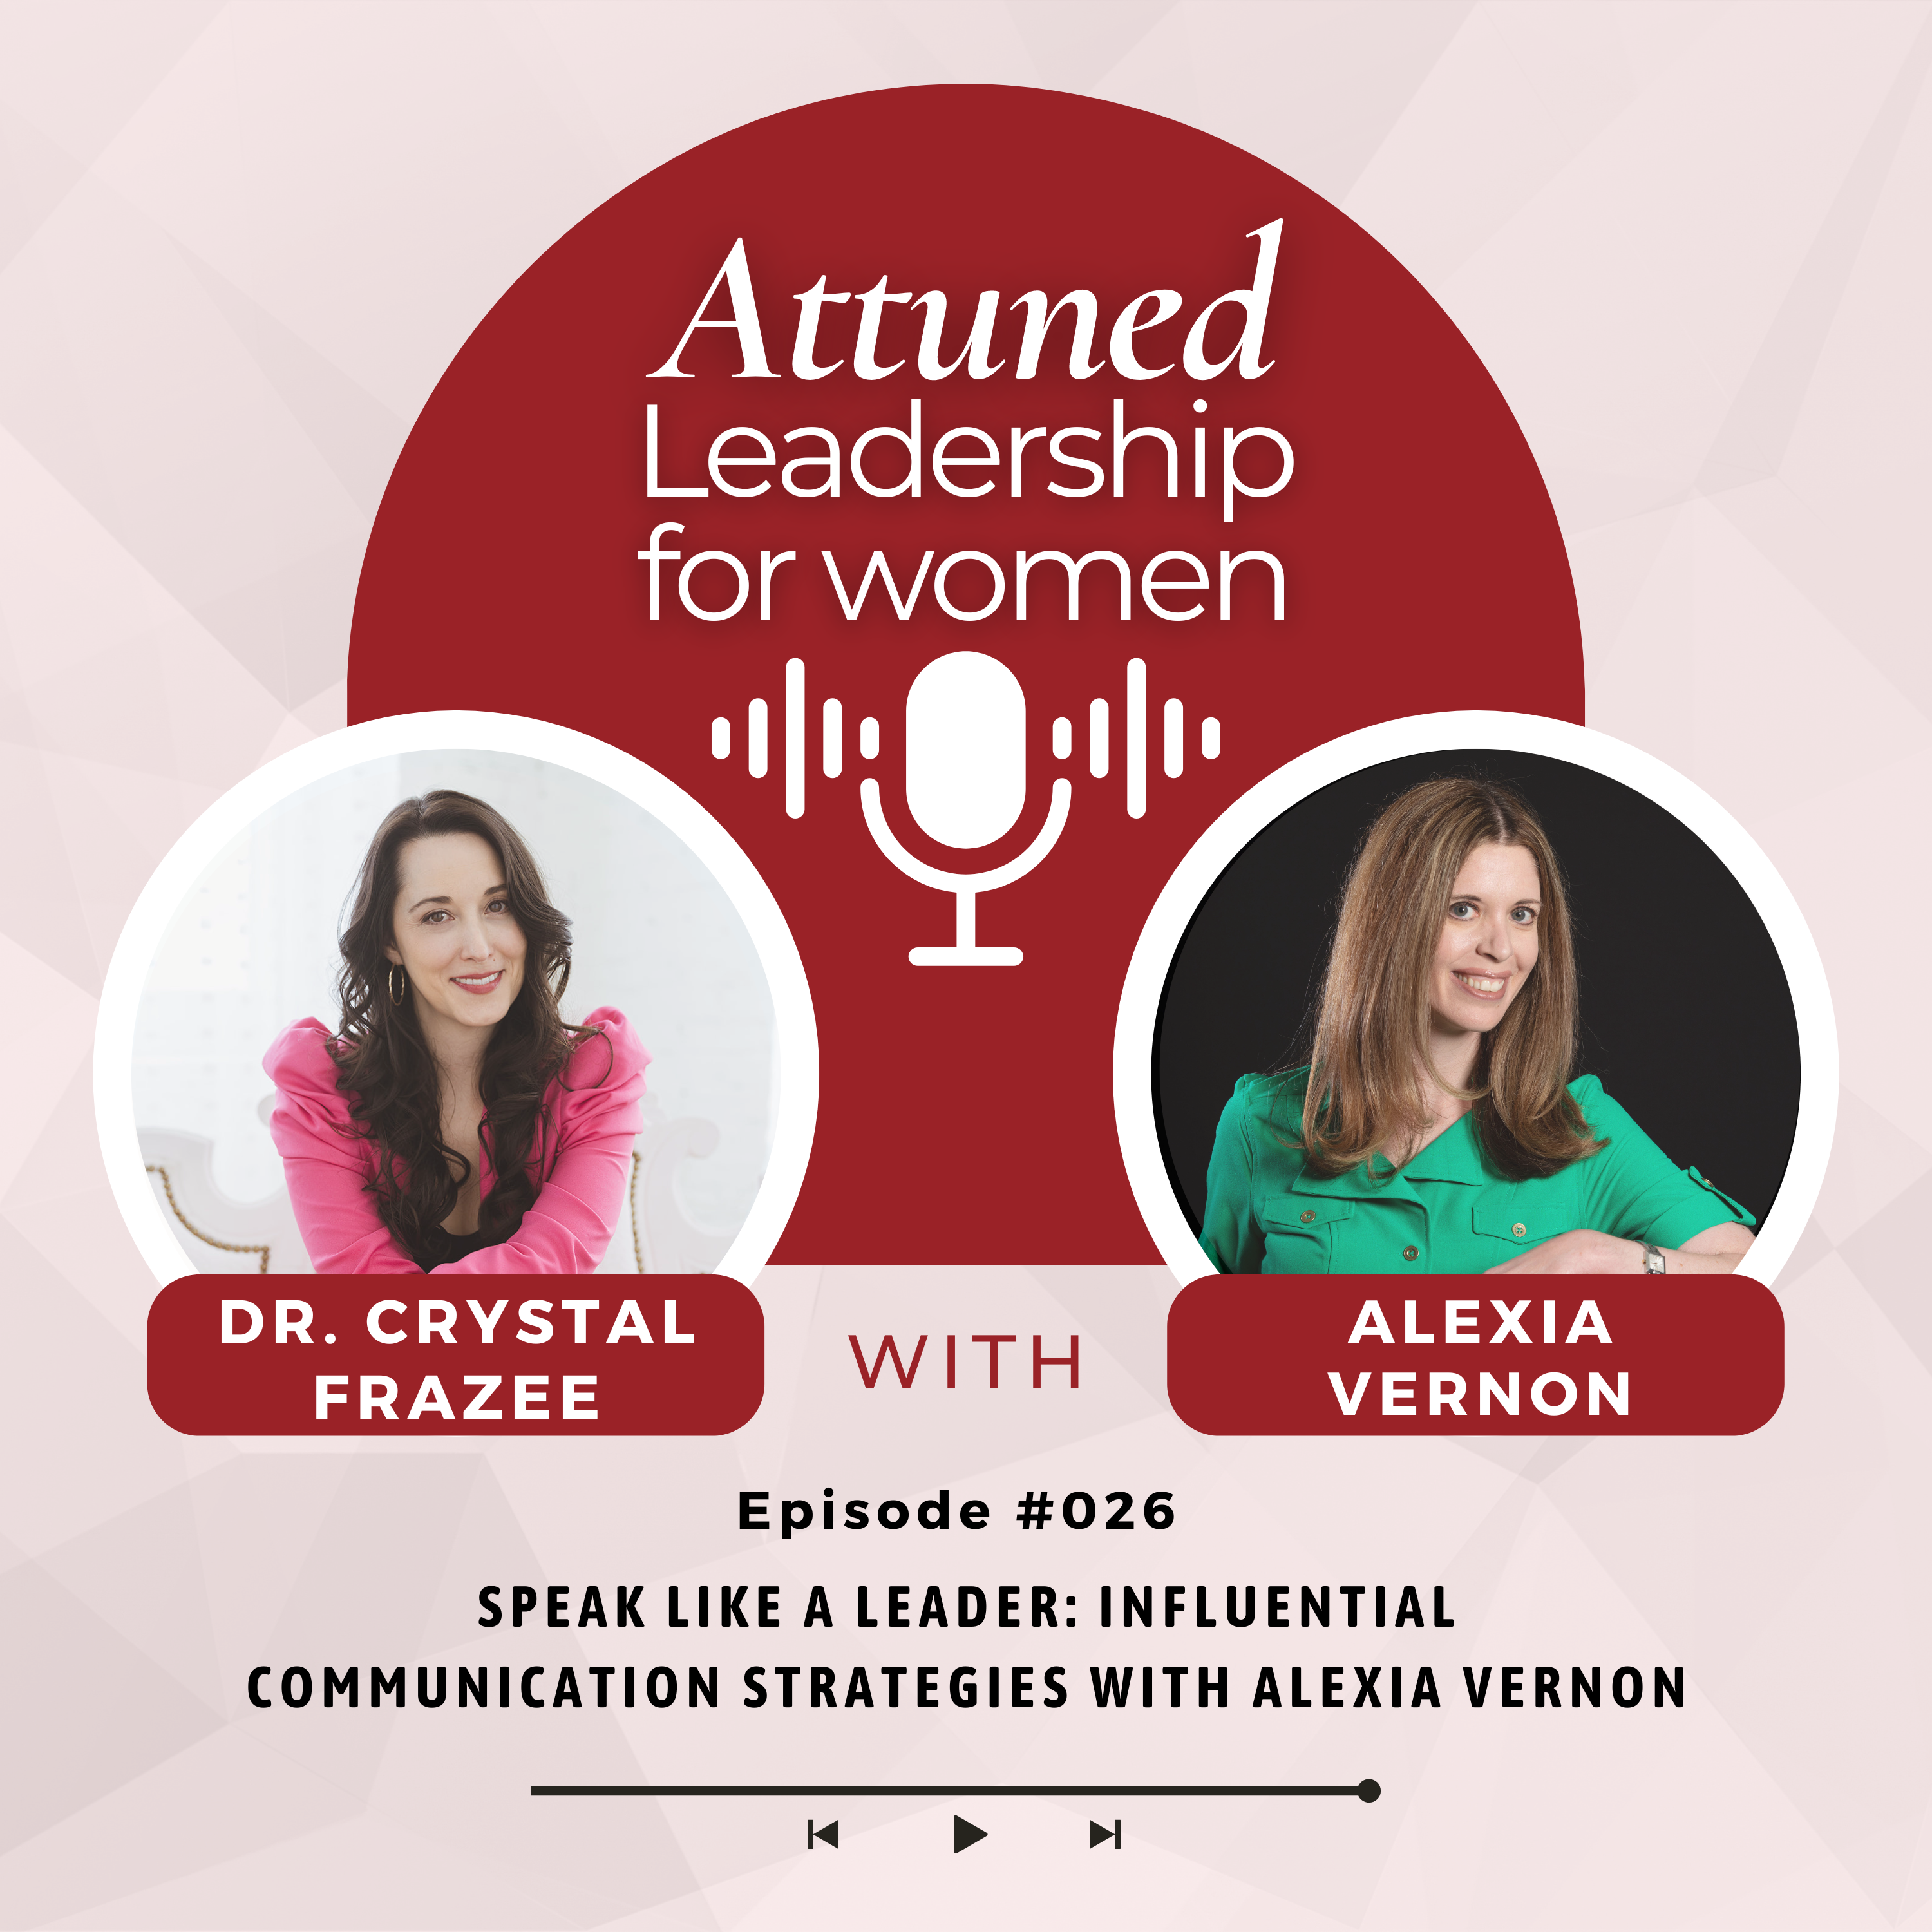 Two white women on the cover of a podcast episode image discussing the topic of cringe-free self-promotion for women leaders.